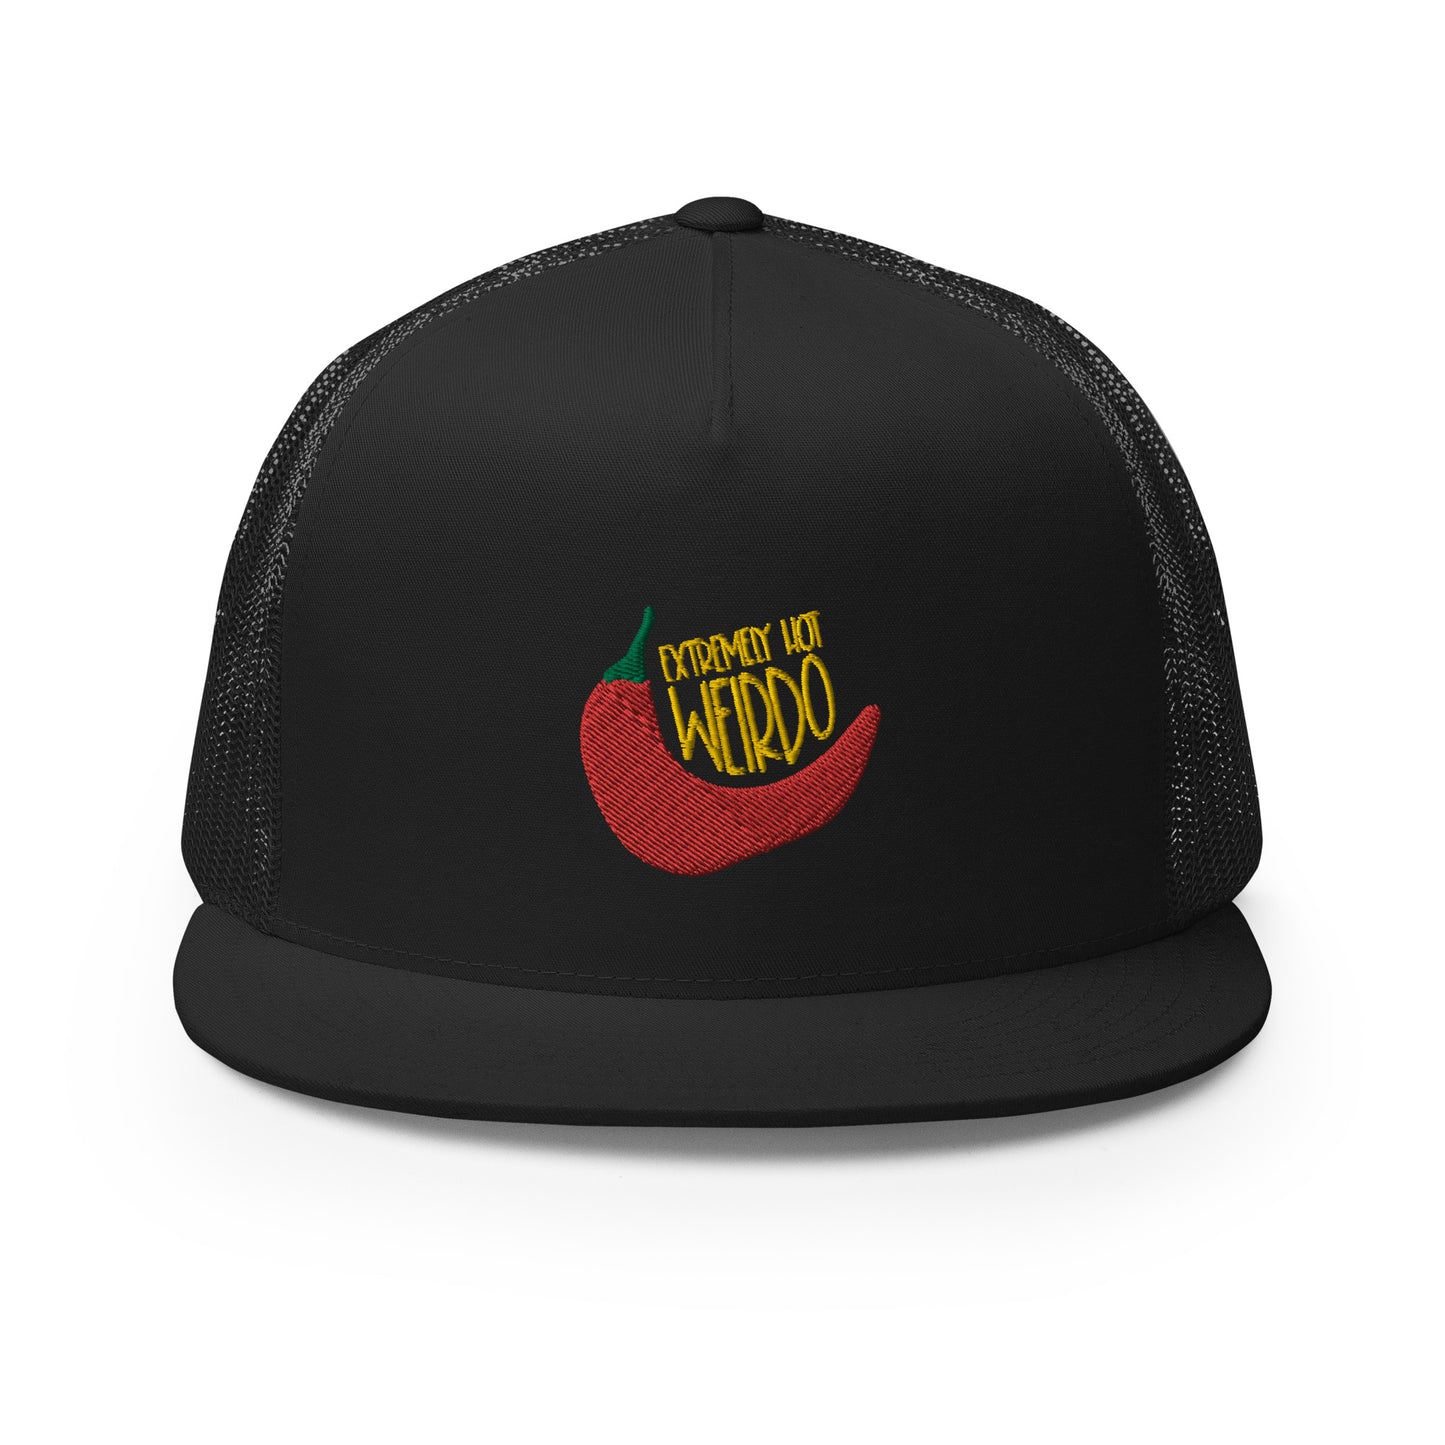 #WEIRDO | Trucker cap for Extremely Hot Weirdos! This funny meme is embroidered at the front of this black funny hat for adults! Only if you are weird and extremely hot you can wear this funny hat!